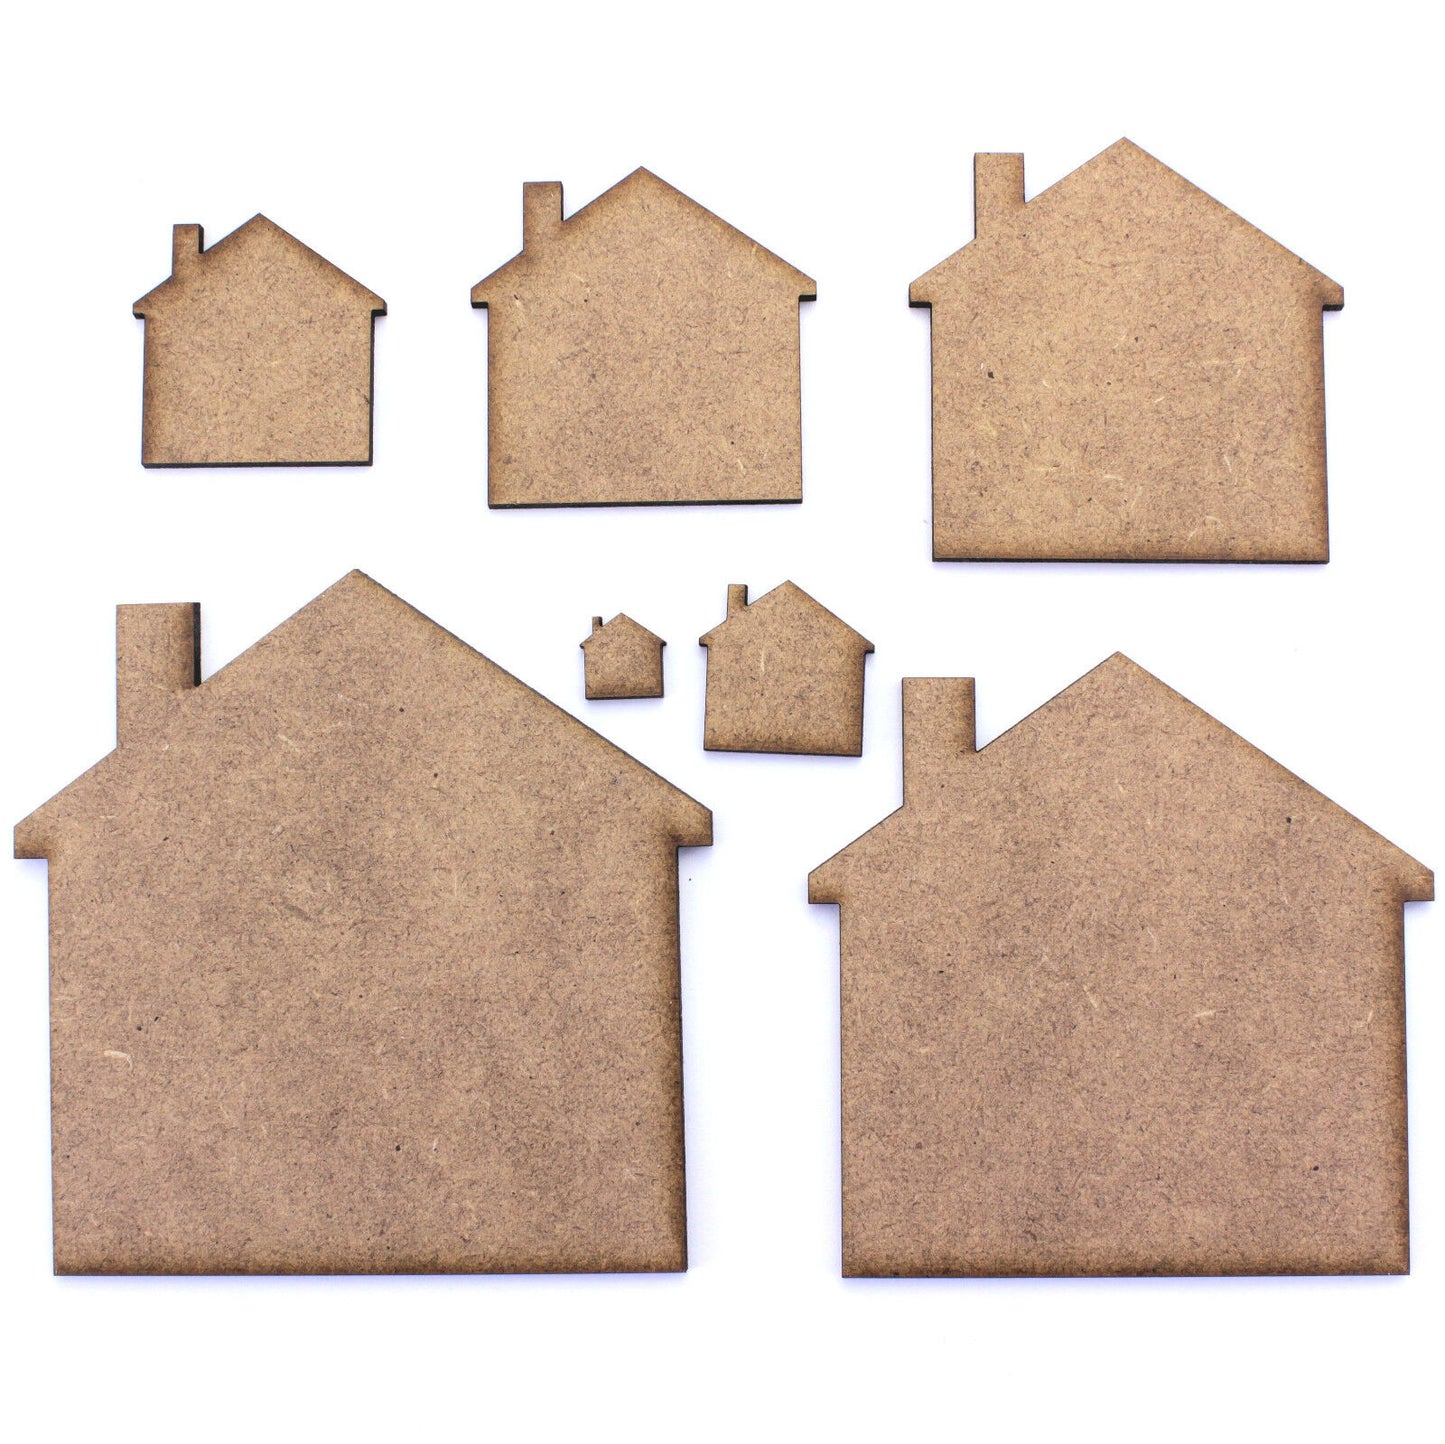 Blank House / Home Craft Shapes. Various Sizes 10mm - 200mm. 2mm MDF Laser Cut